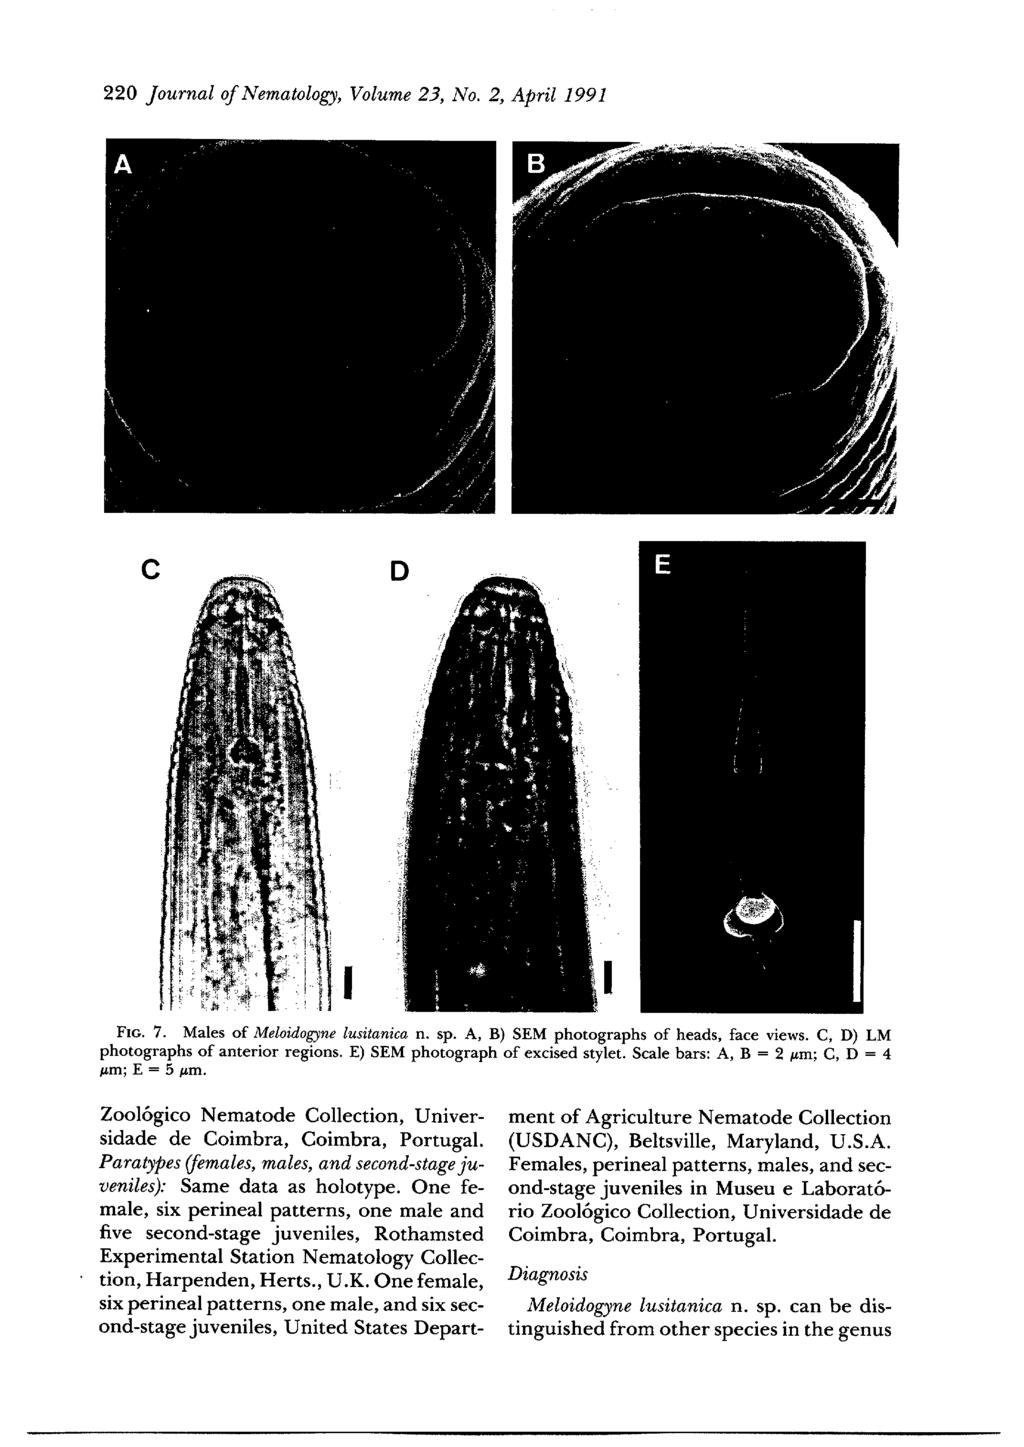 220 Journal of Nematology, Volume 23, No. 2, April 1991 C n E Flo. 7. Males of Meloidogyne lusitanica n. sp. A, B) SEM photographs of heads, face views. C, D) LM photographs of anterior regions.